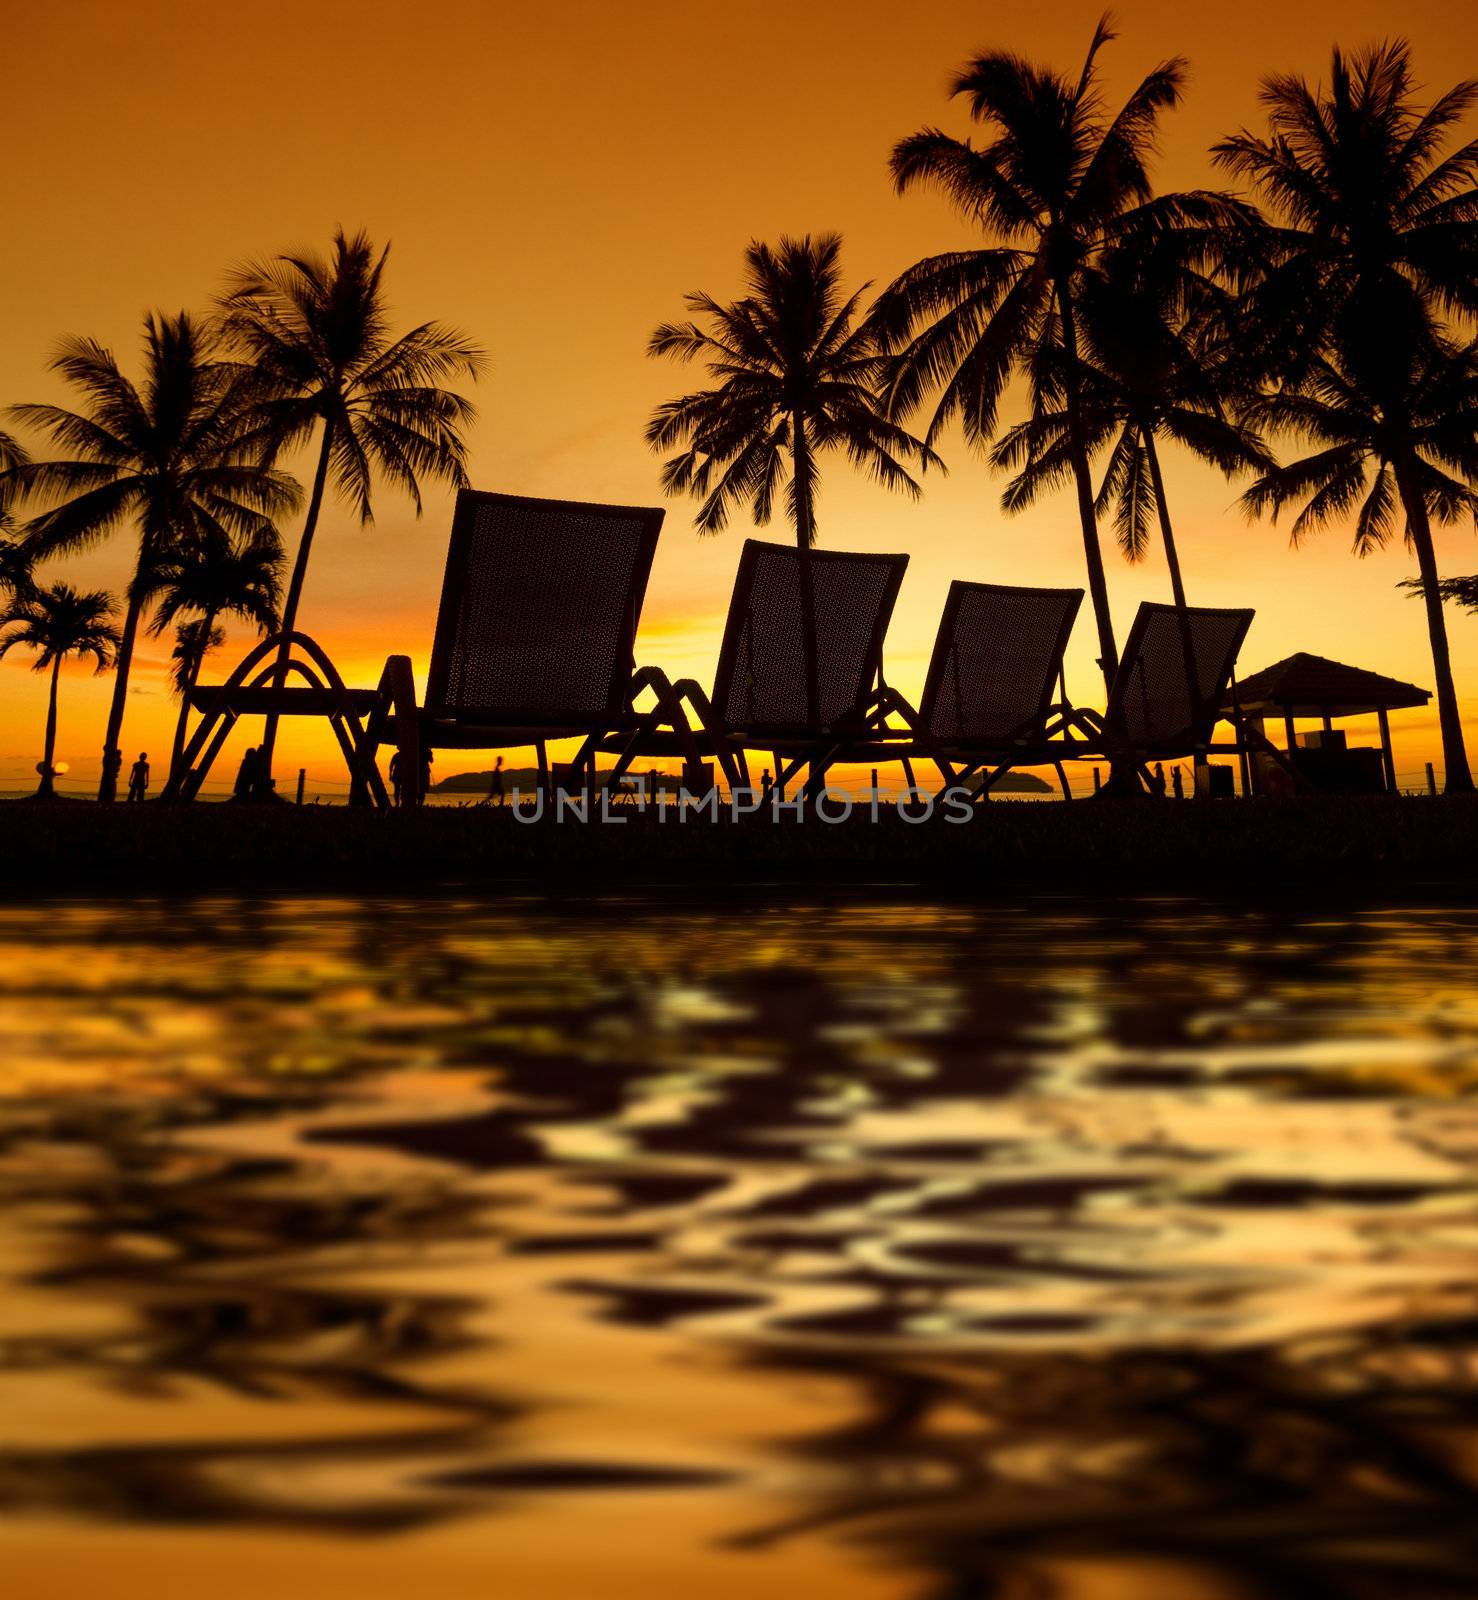 Row deckchairs with water reflection on beach at sunset, Tanjung Aru, Malaysia.